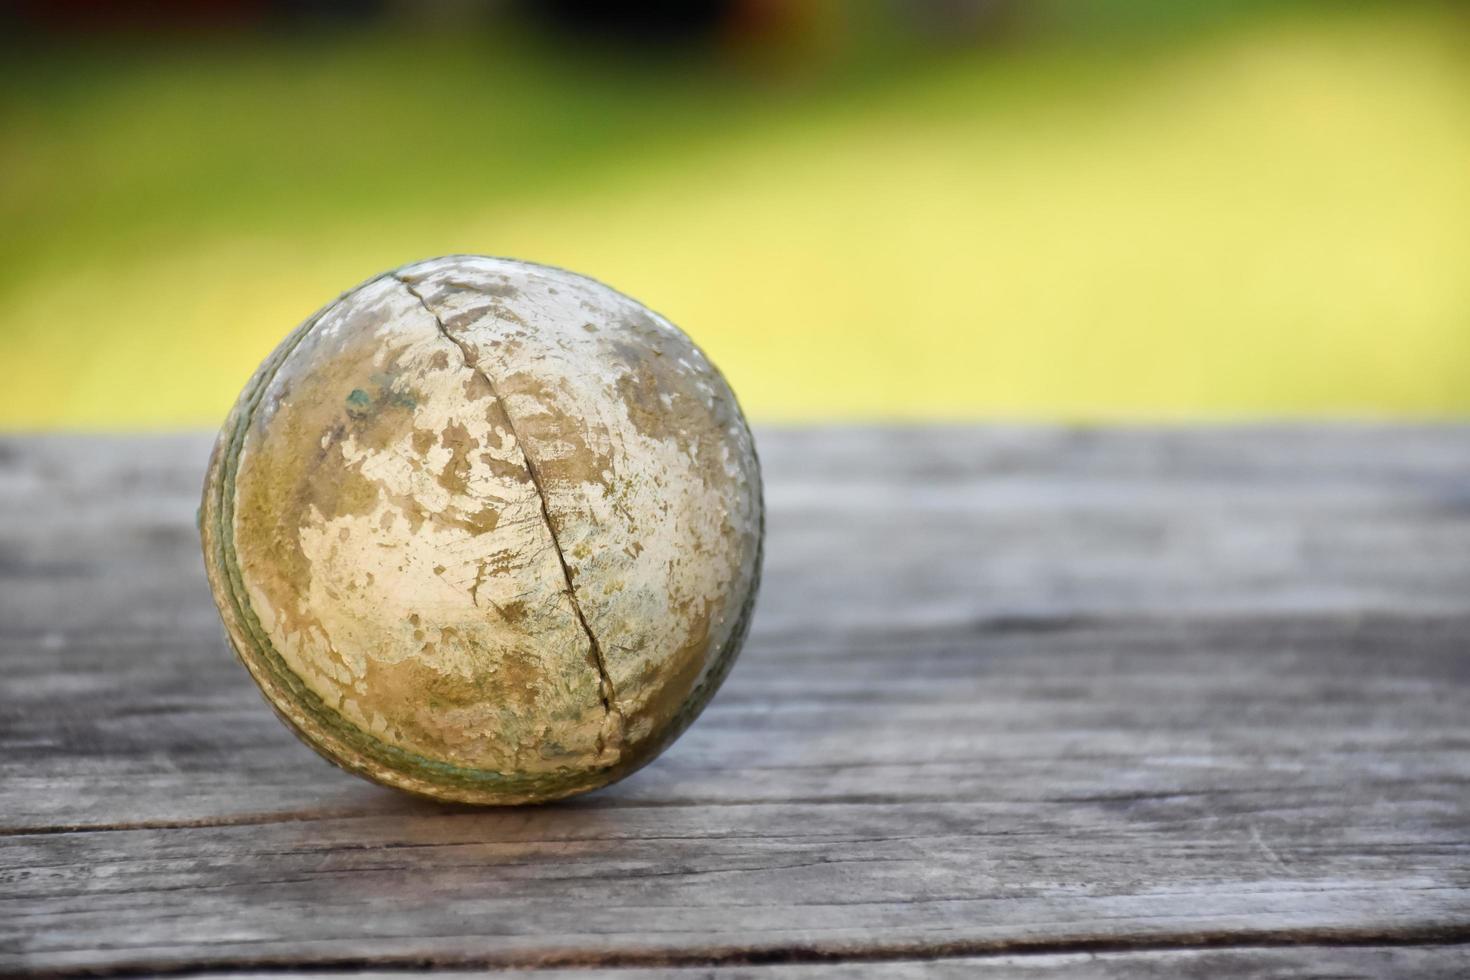 Old training cricket sport equipments on dark floor, leather ball, wickets, helmet and wooden bat, soft and selective focus, traditional cricket sport lovers around the world concept. photo